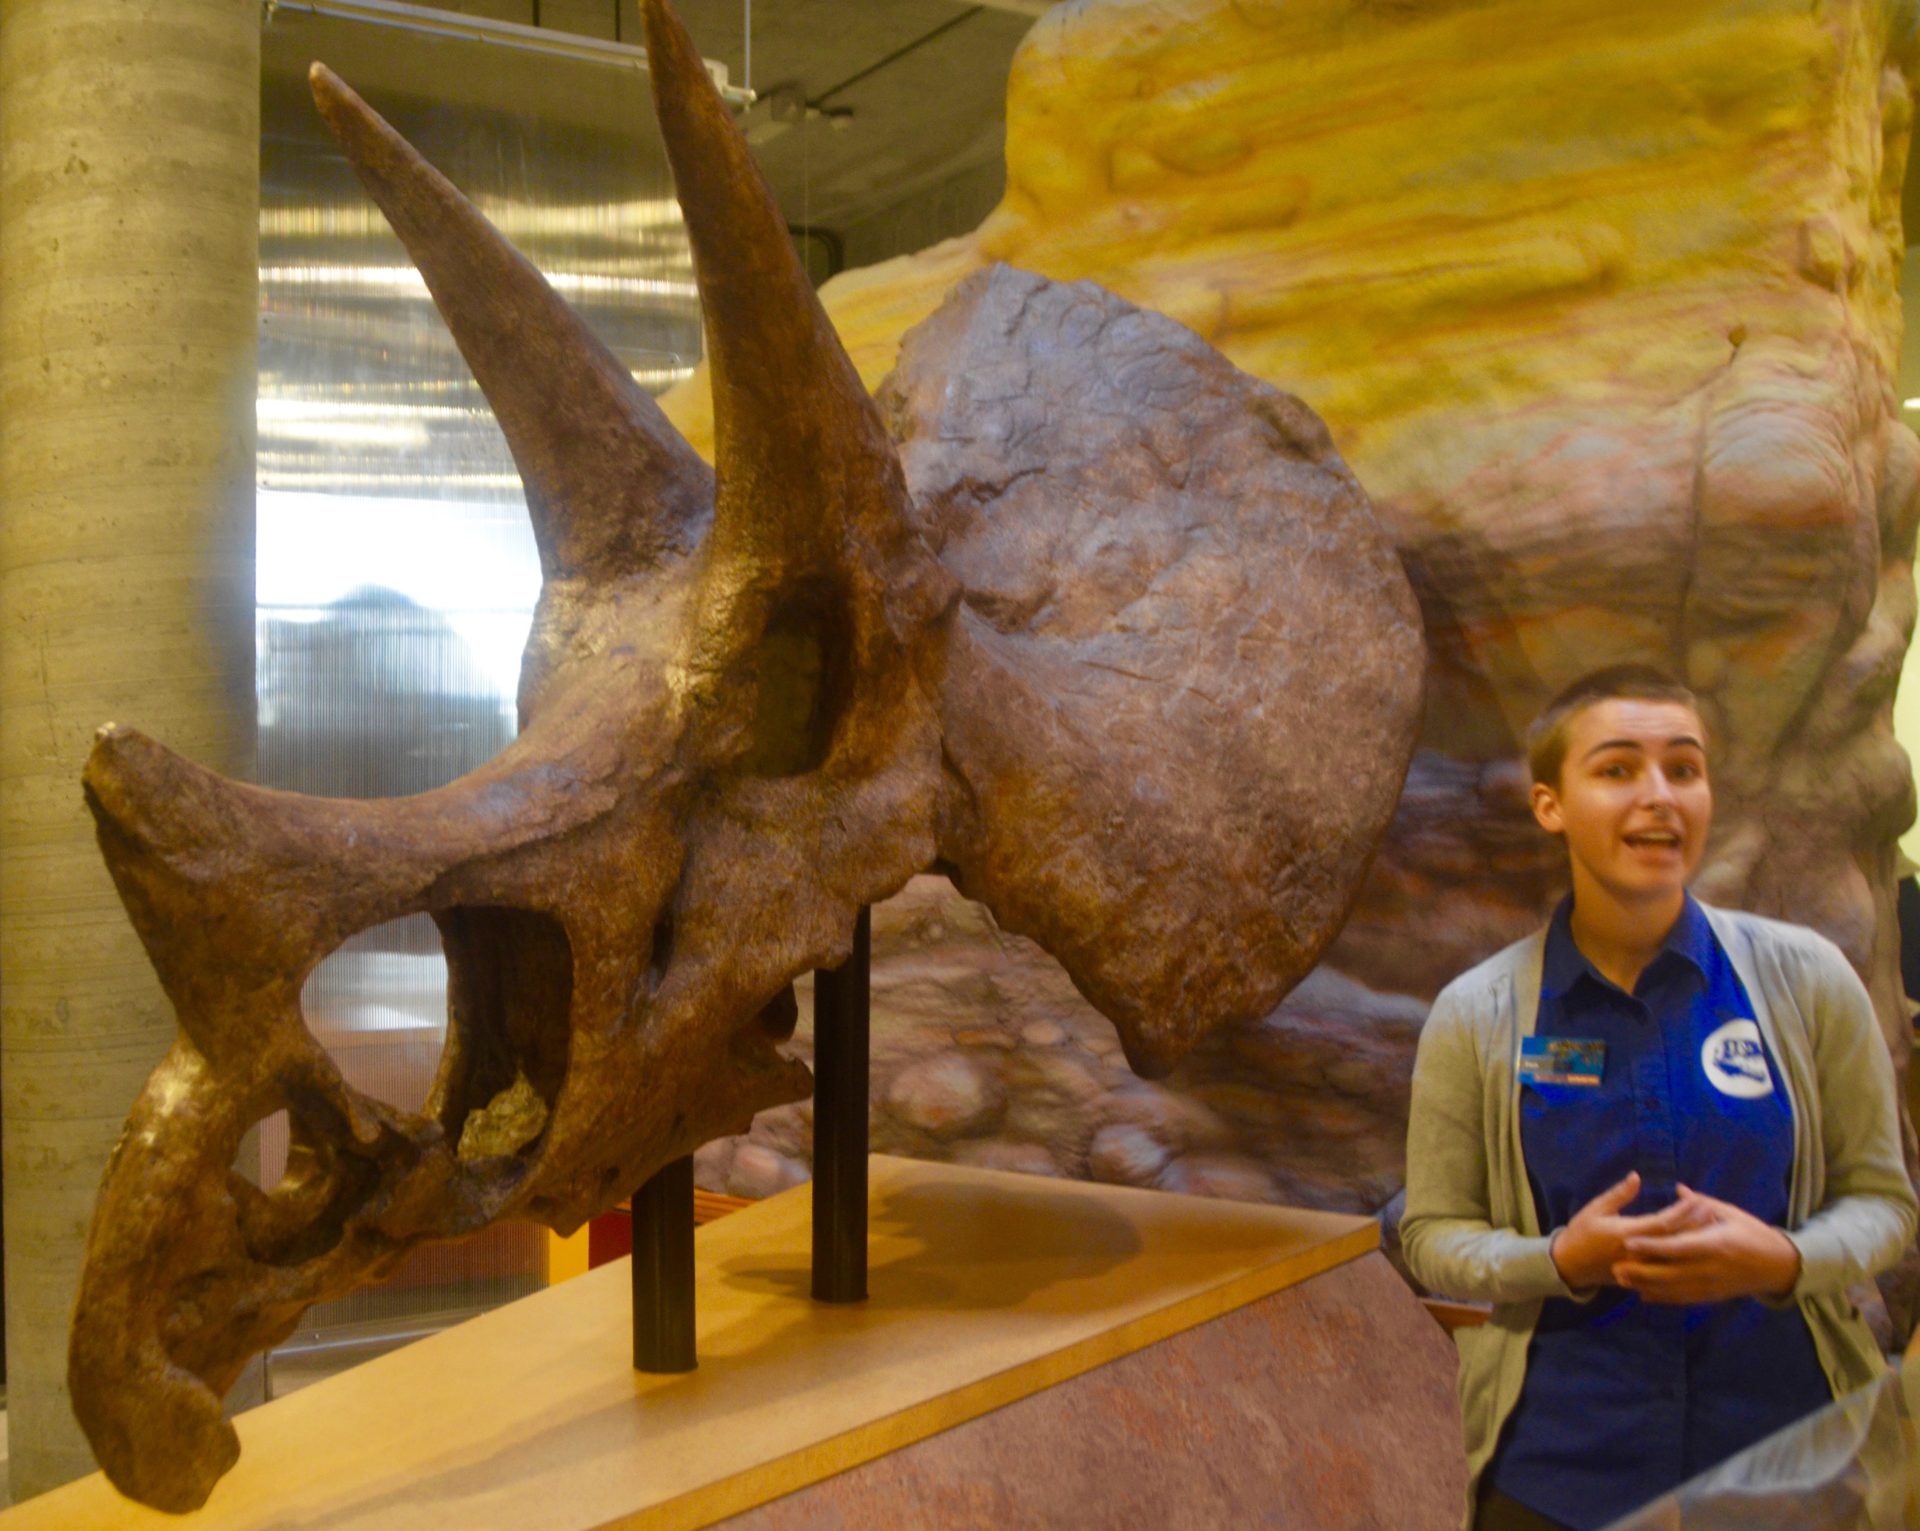 Our Guide Fen with Triceratops